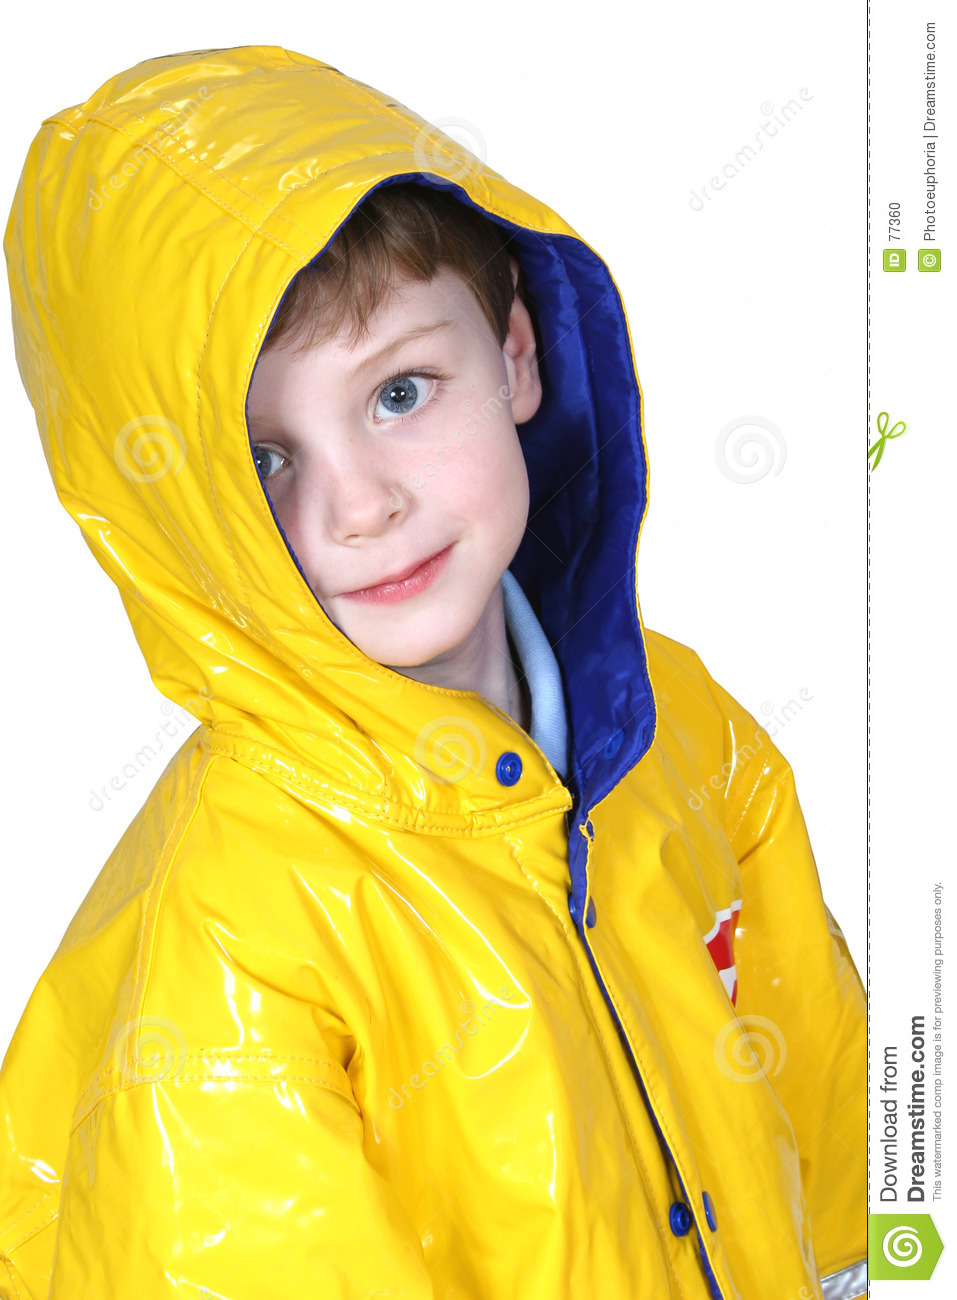 Four Year Old Boy With Big Blue Eyes In A Yellow Rain Coat Against A